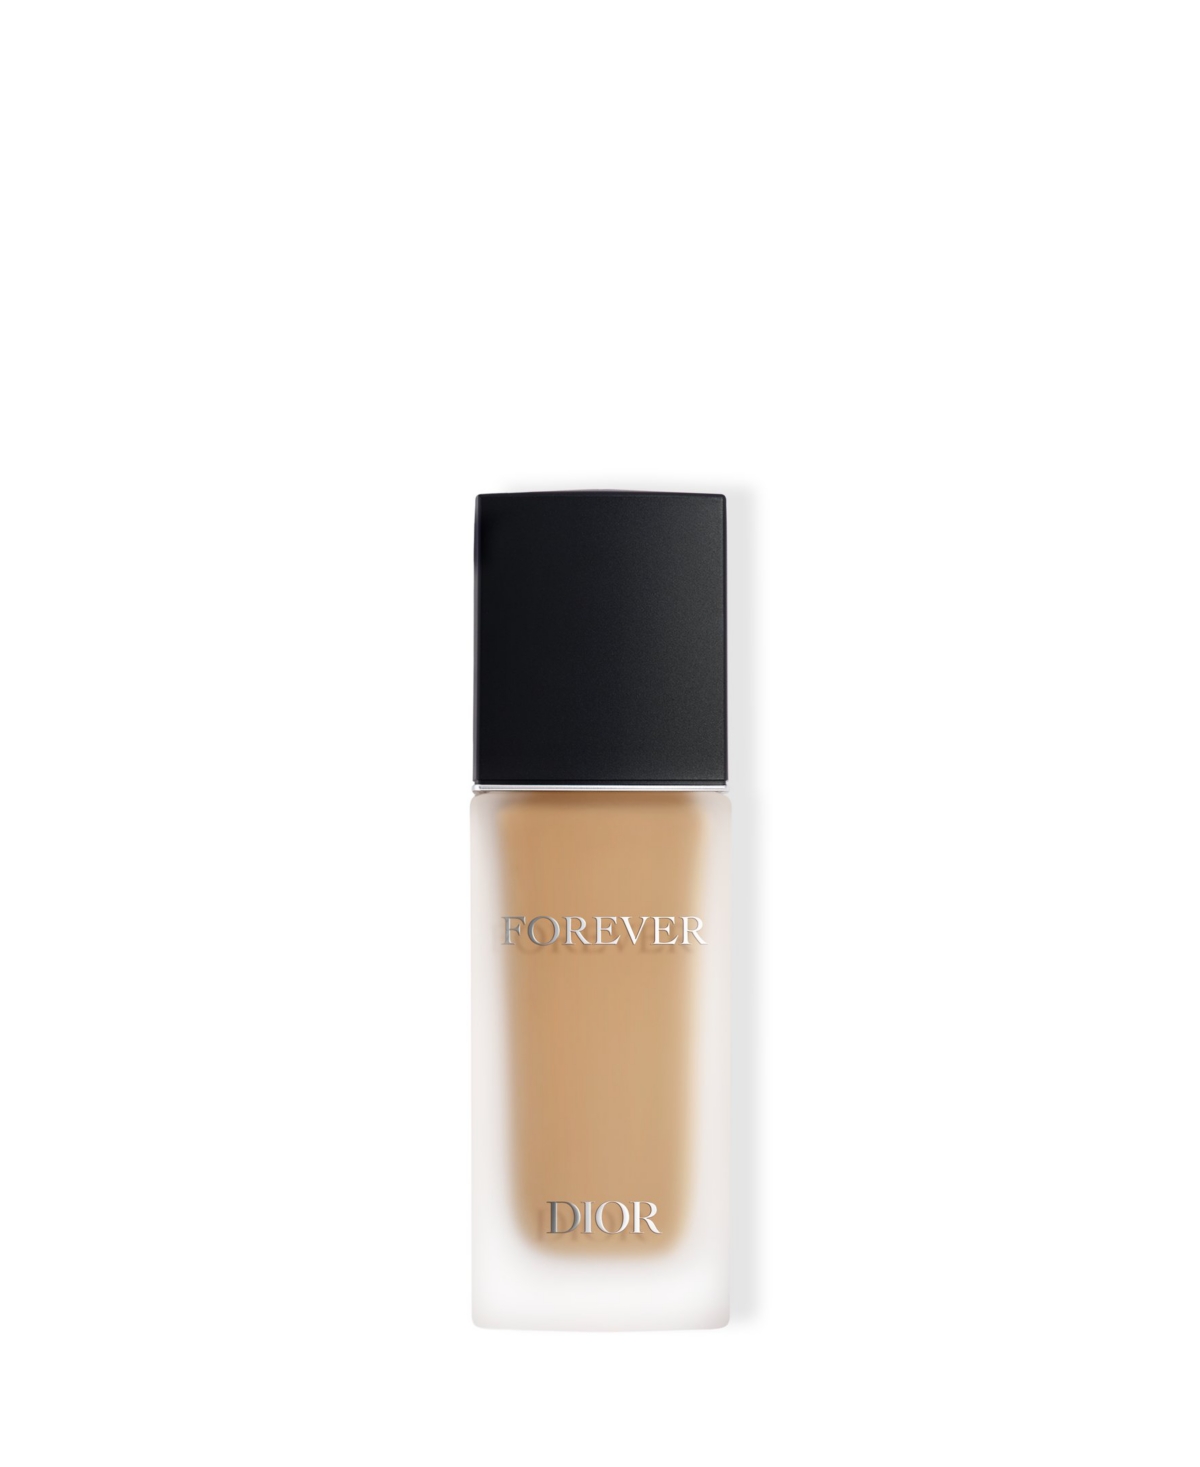 Dior Forever Matte Skincare Foundation Spf 15 In Warm Olive (light To Medium Skin With Wa